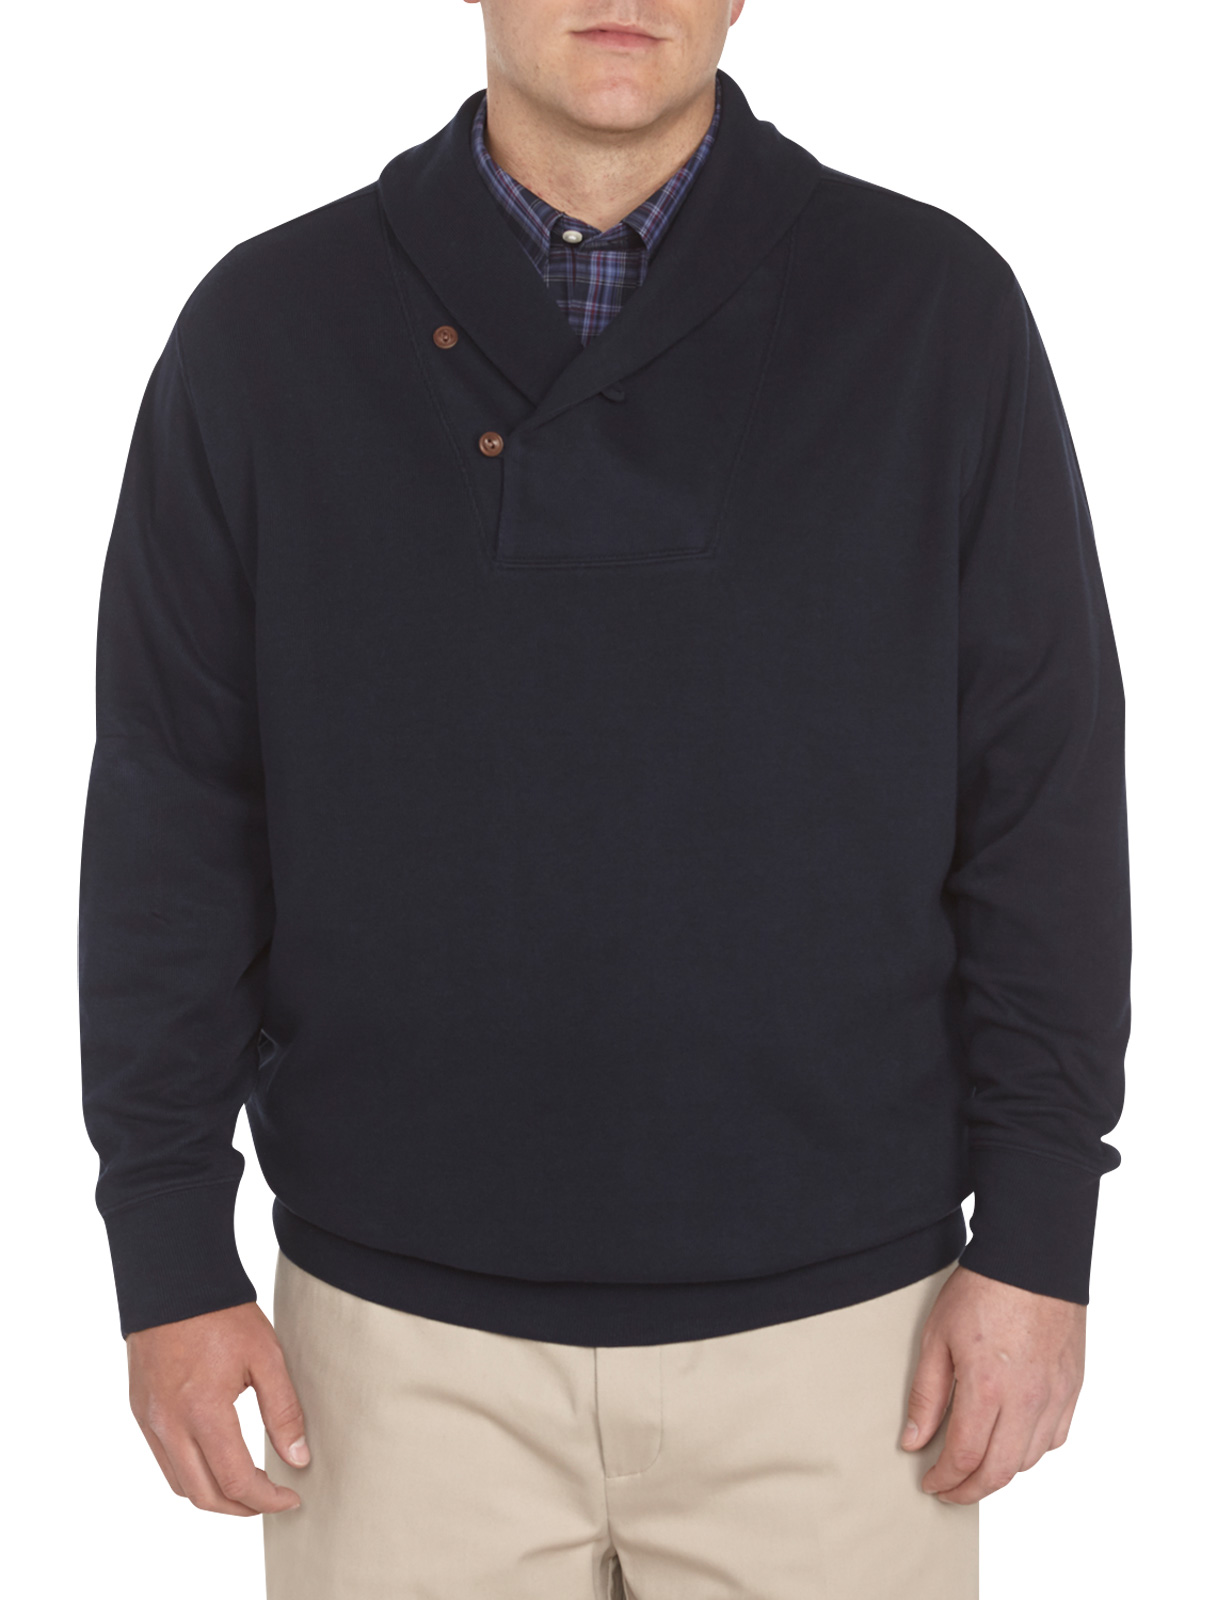 Oak Hill Men's Big and Tall Ribbed-Knit Shawl Collar Pullover